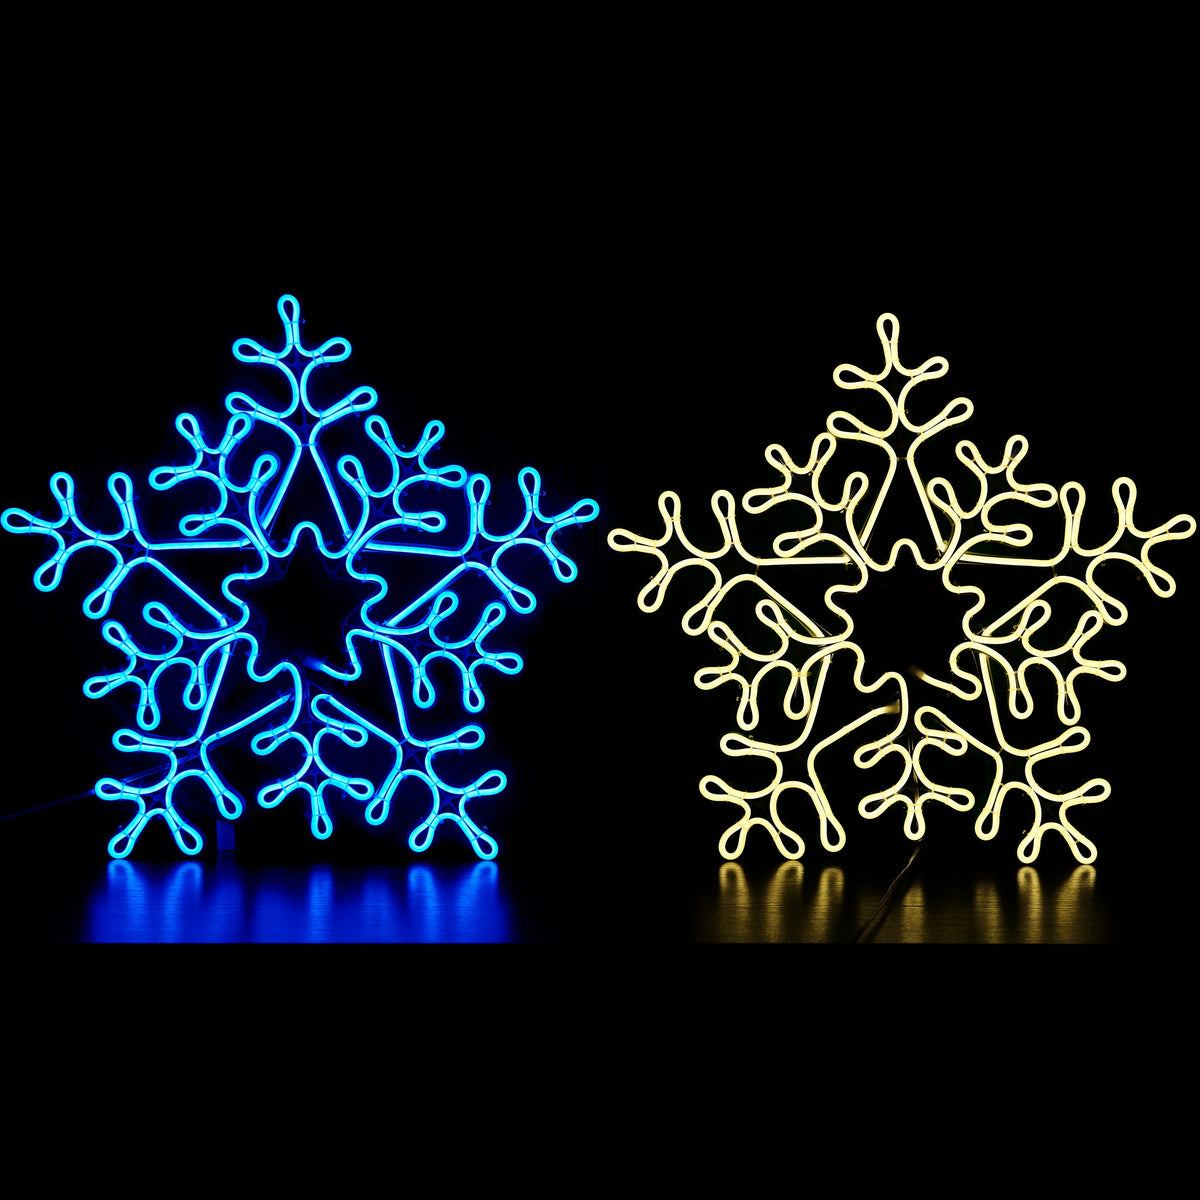 20IN Snowflake Neon Rope Light, Warm White & Blue